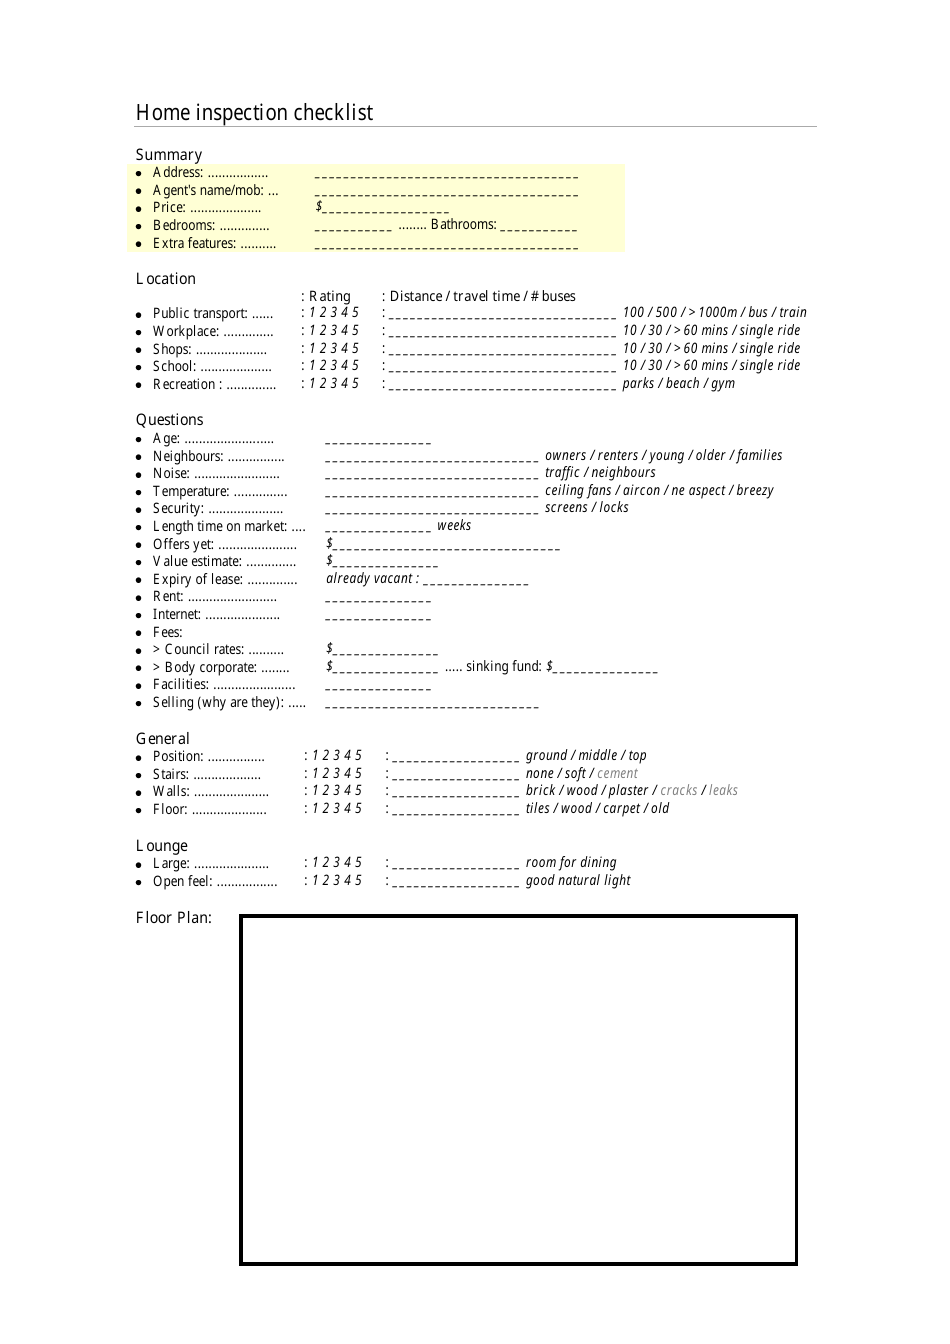 Home Inspection Checklist Template, Page 1